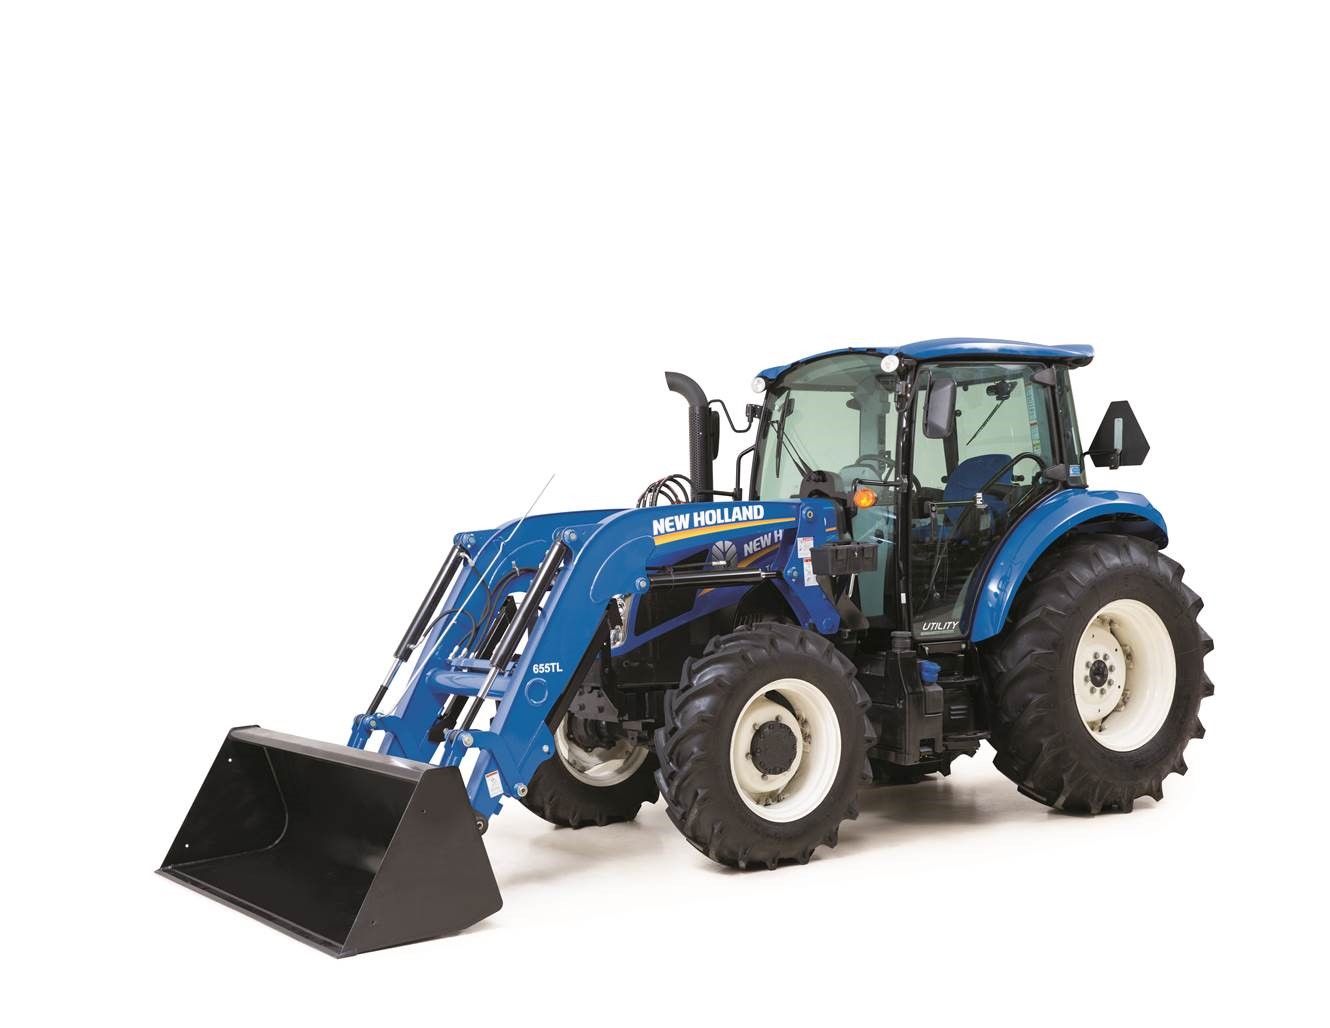 New Holland T4 Series Tractors Set a New Standard for Utility Tractors